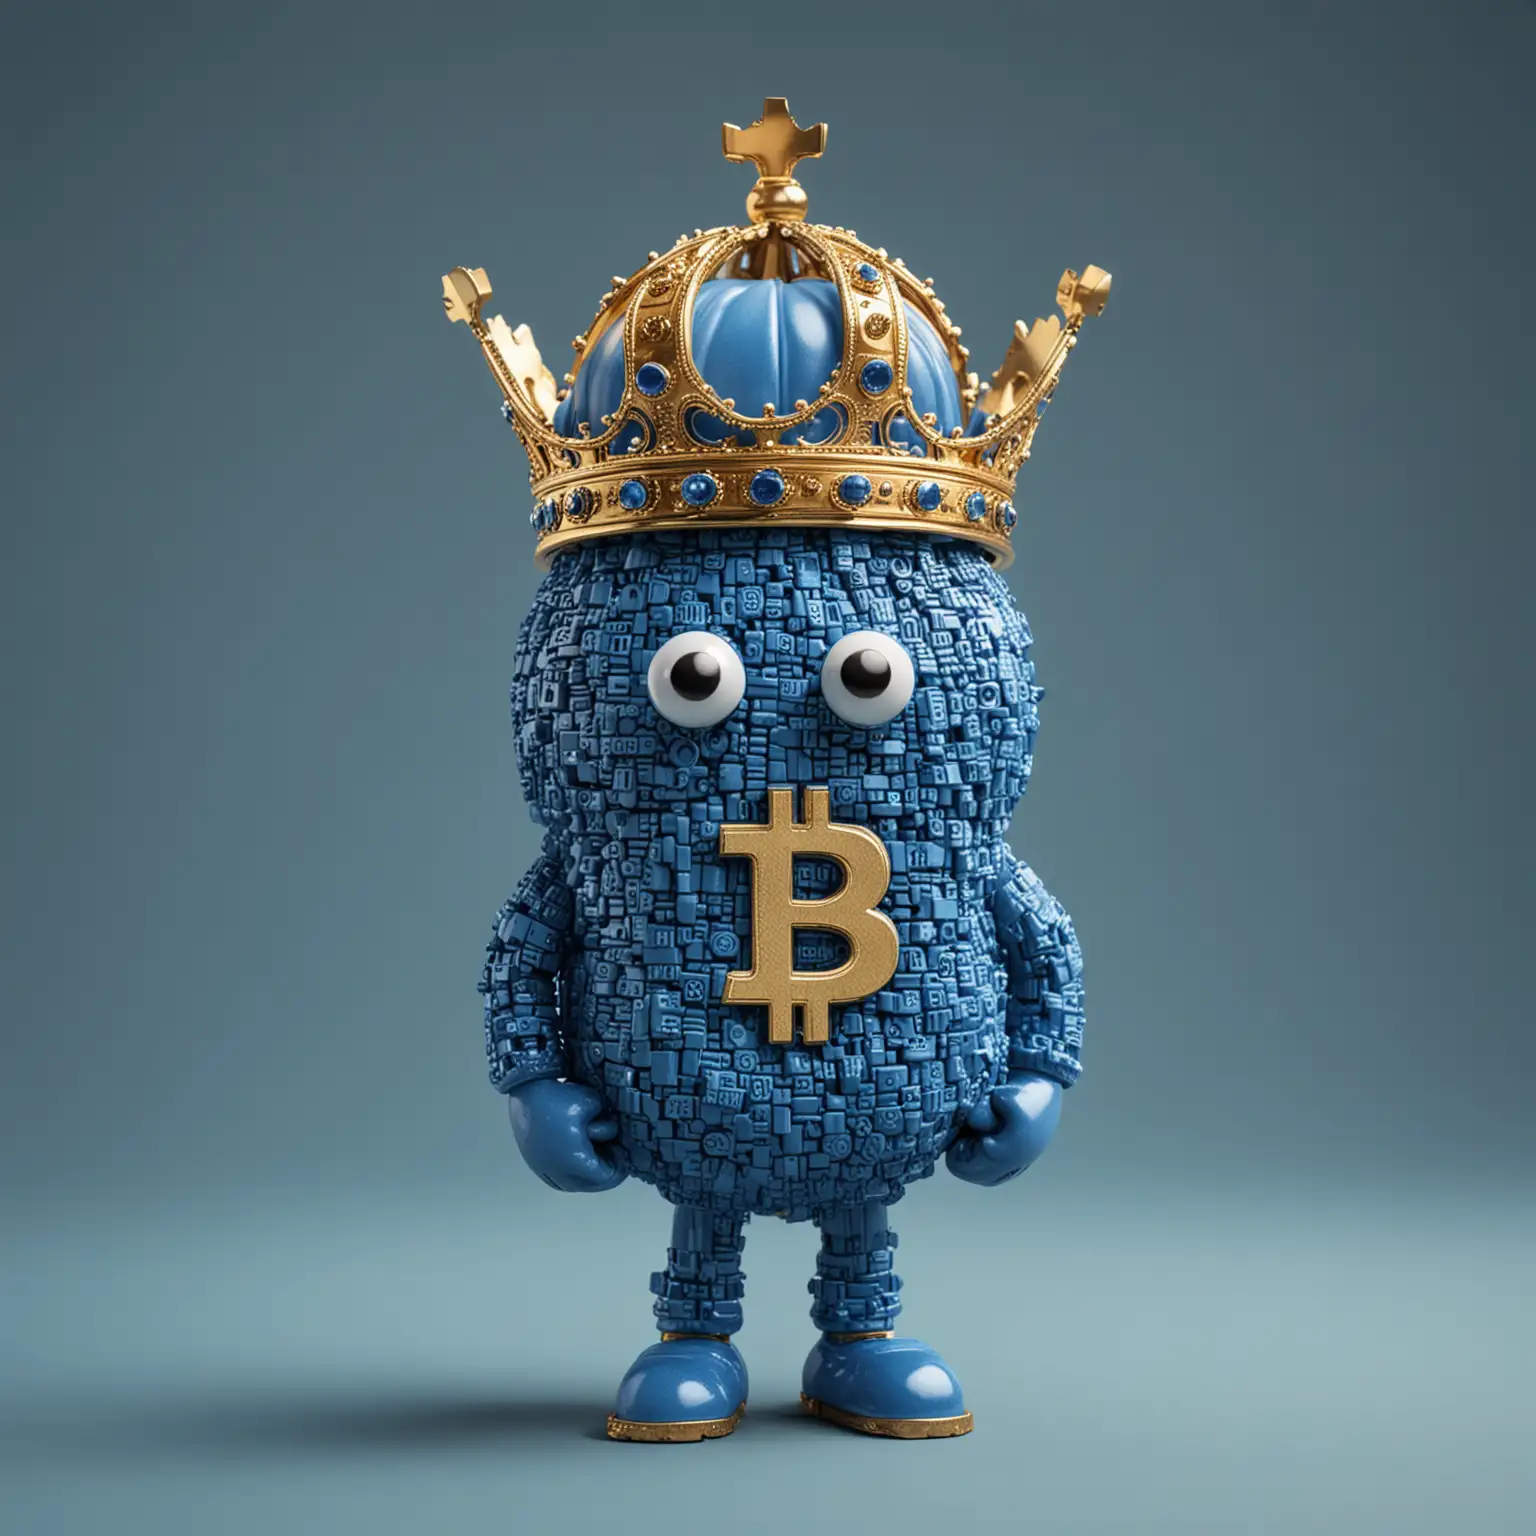 Royal Blue Bitcoin Figure with Crown Digital Currency Monarch on Gleaming Platform